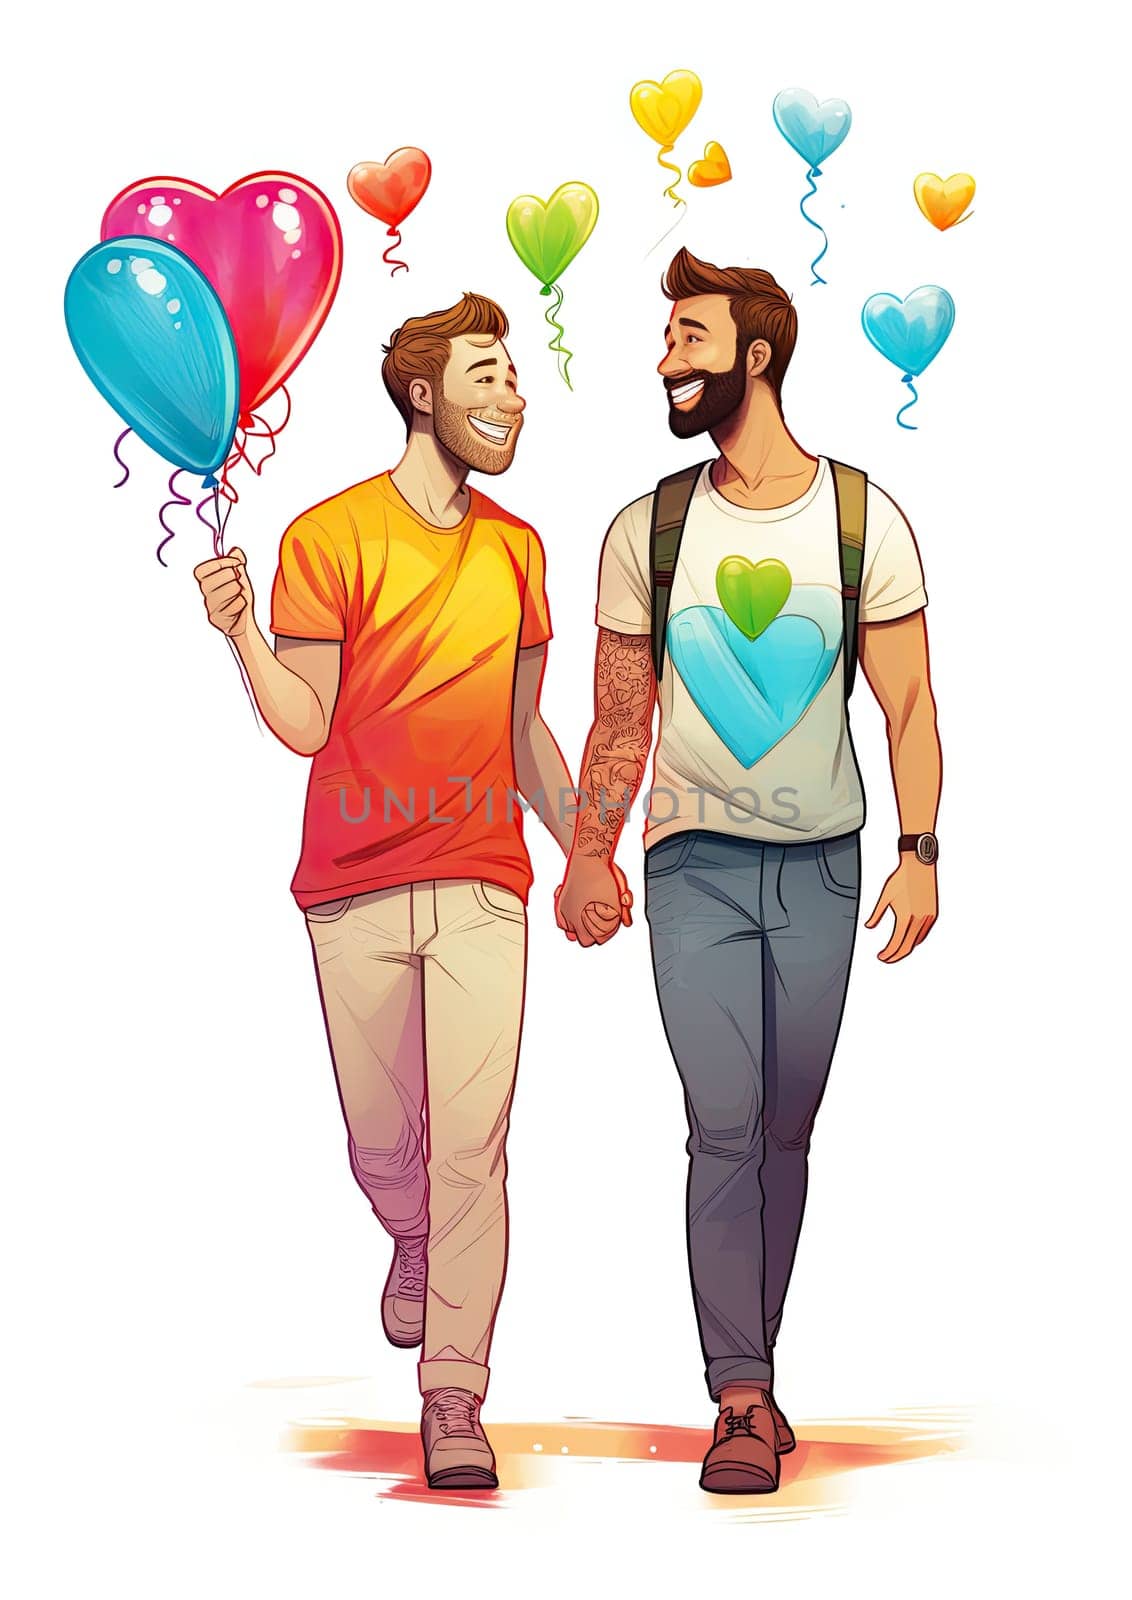 Illustration of two gay men holding hands and laughing with balloons in heart shape isolated on white background.